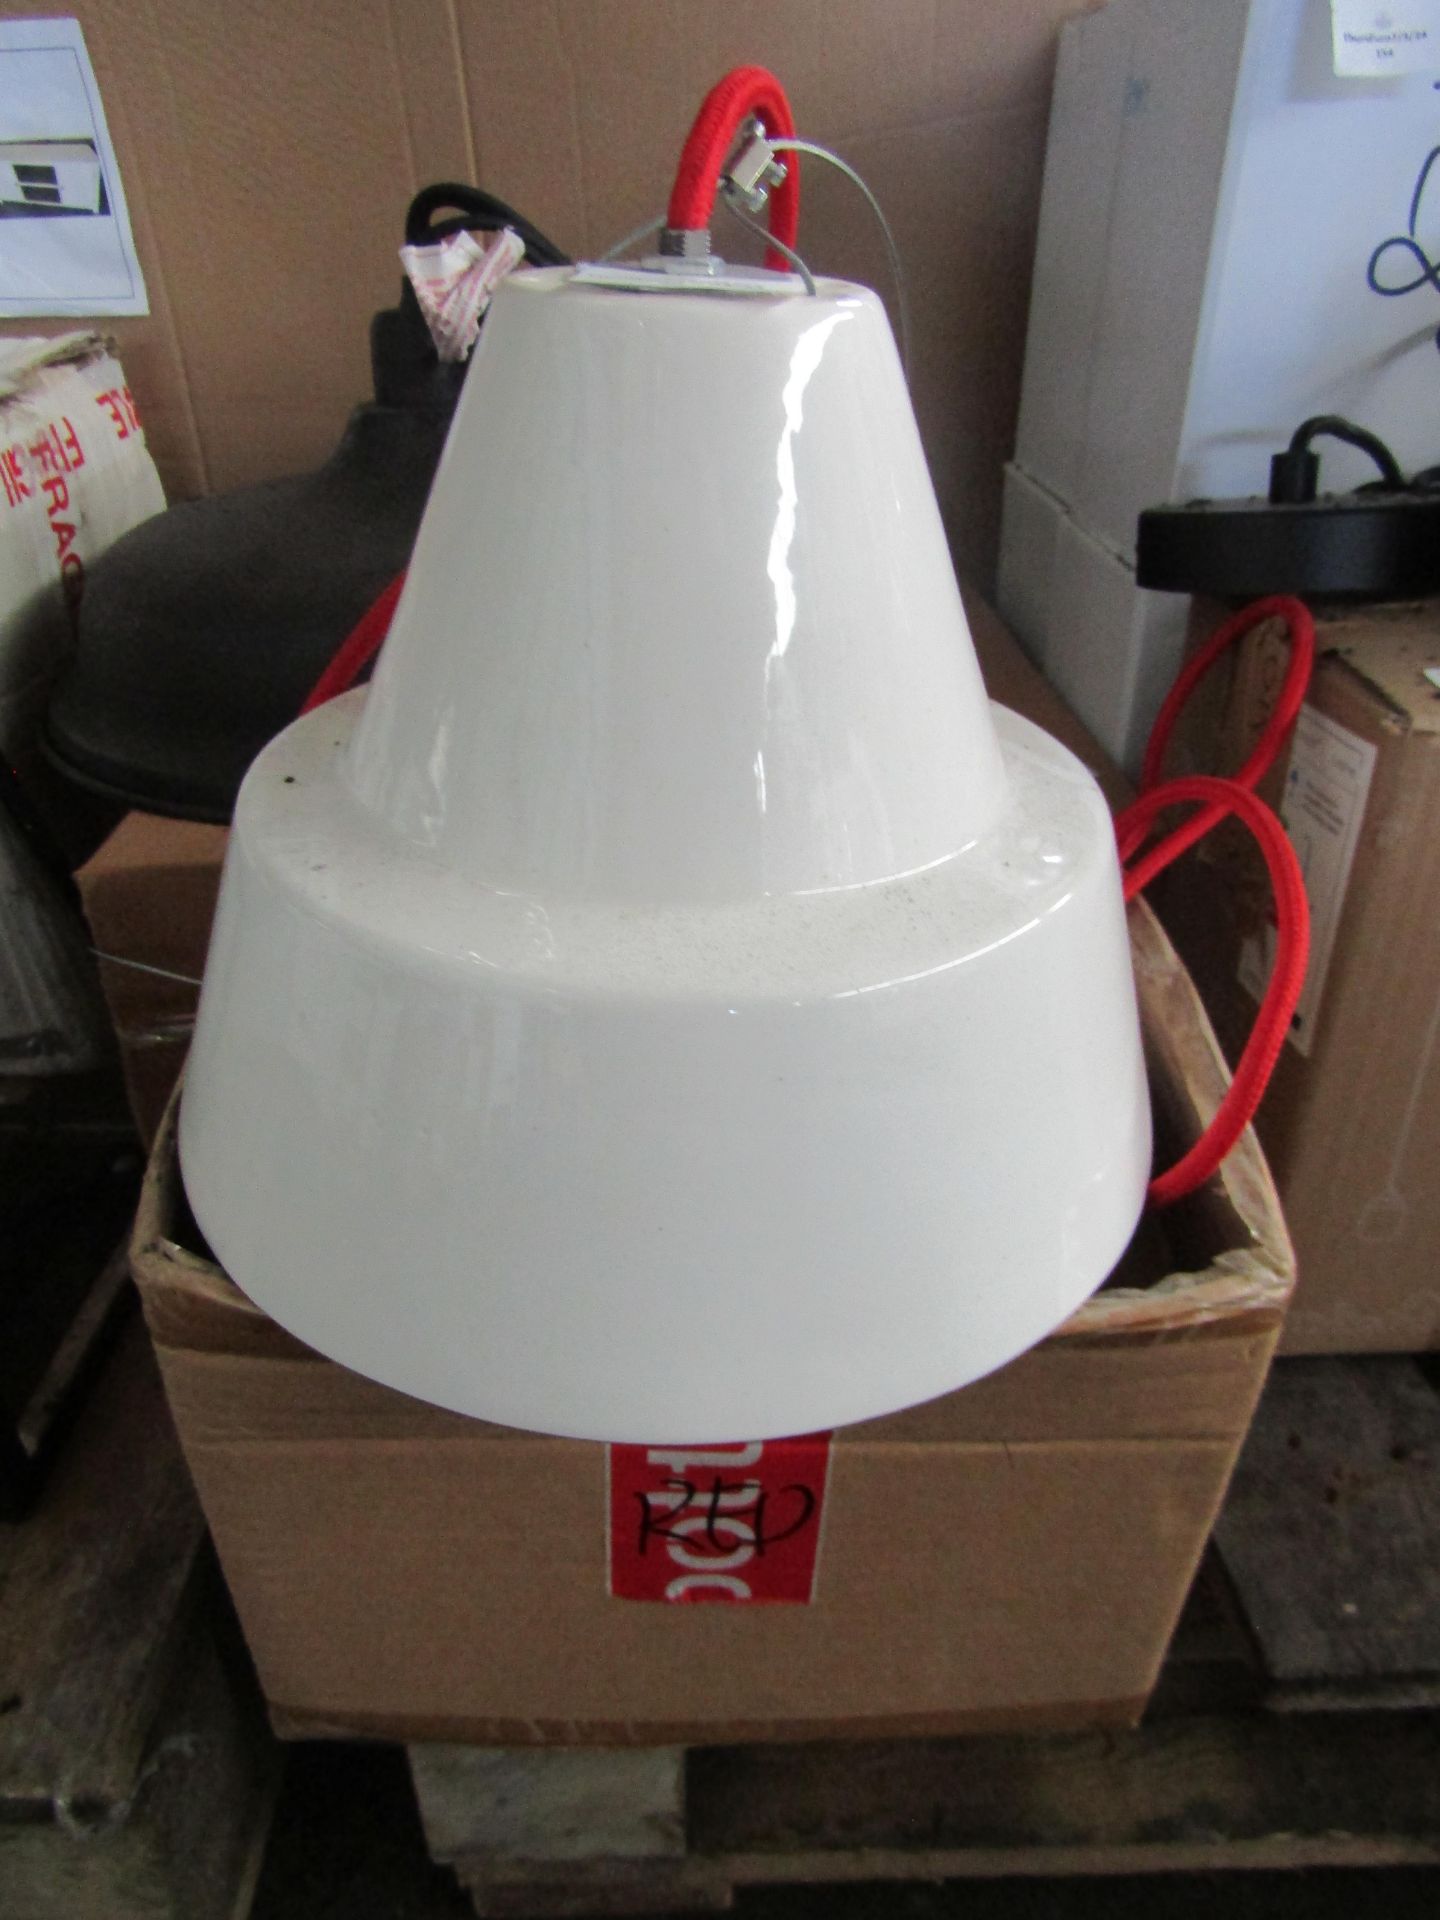 White Gloss Dome Pendant Light Red Cable. Size: D23 x H19cm - RRP œ106.00 - New & Boxed. (432)